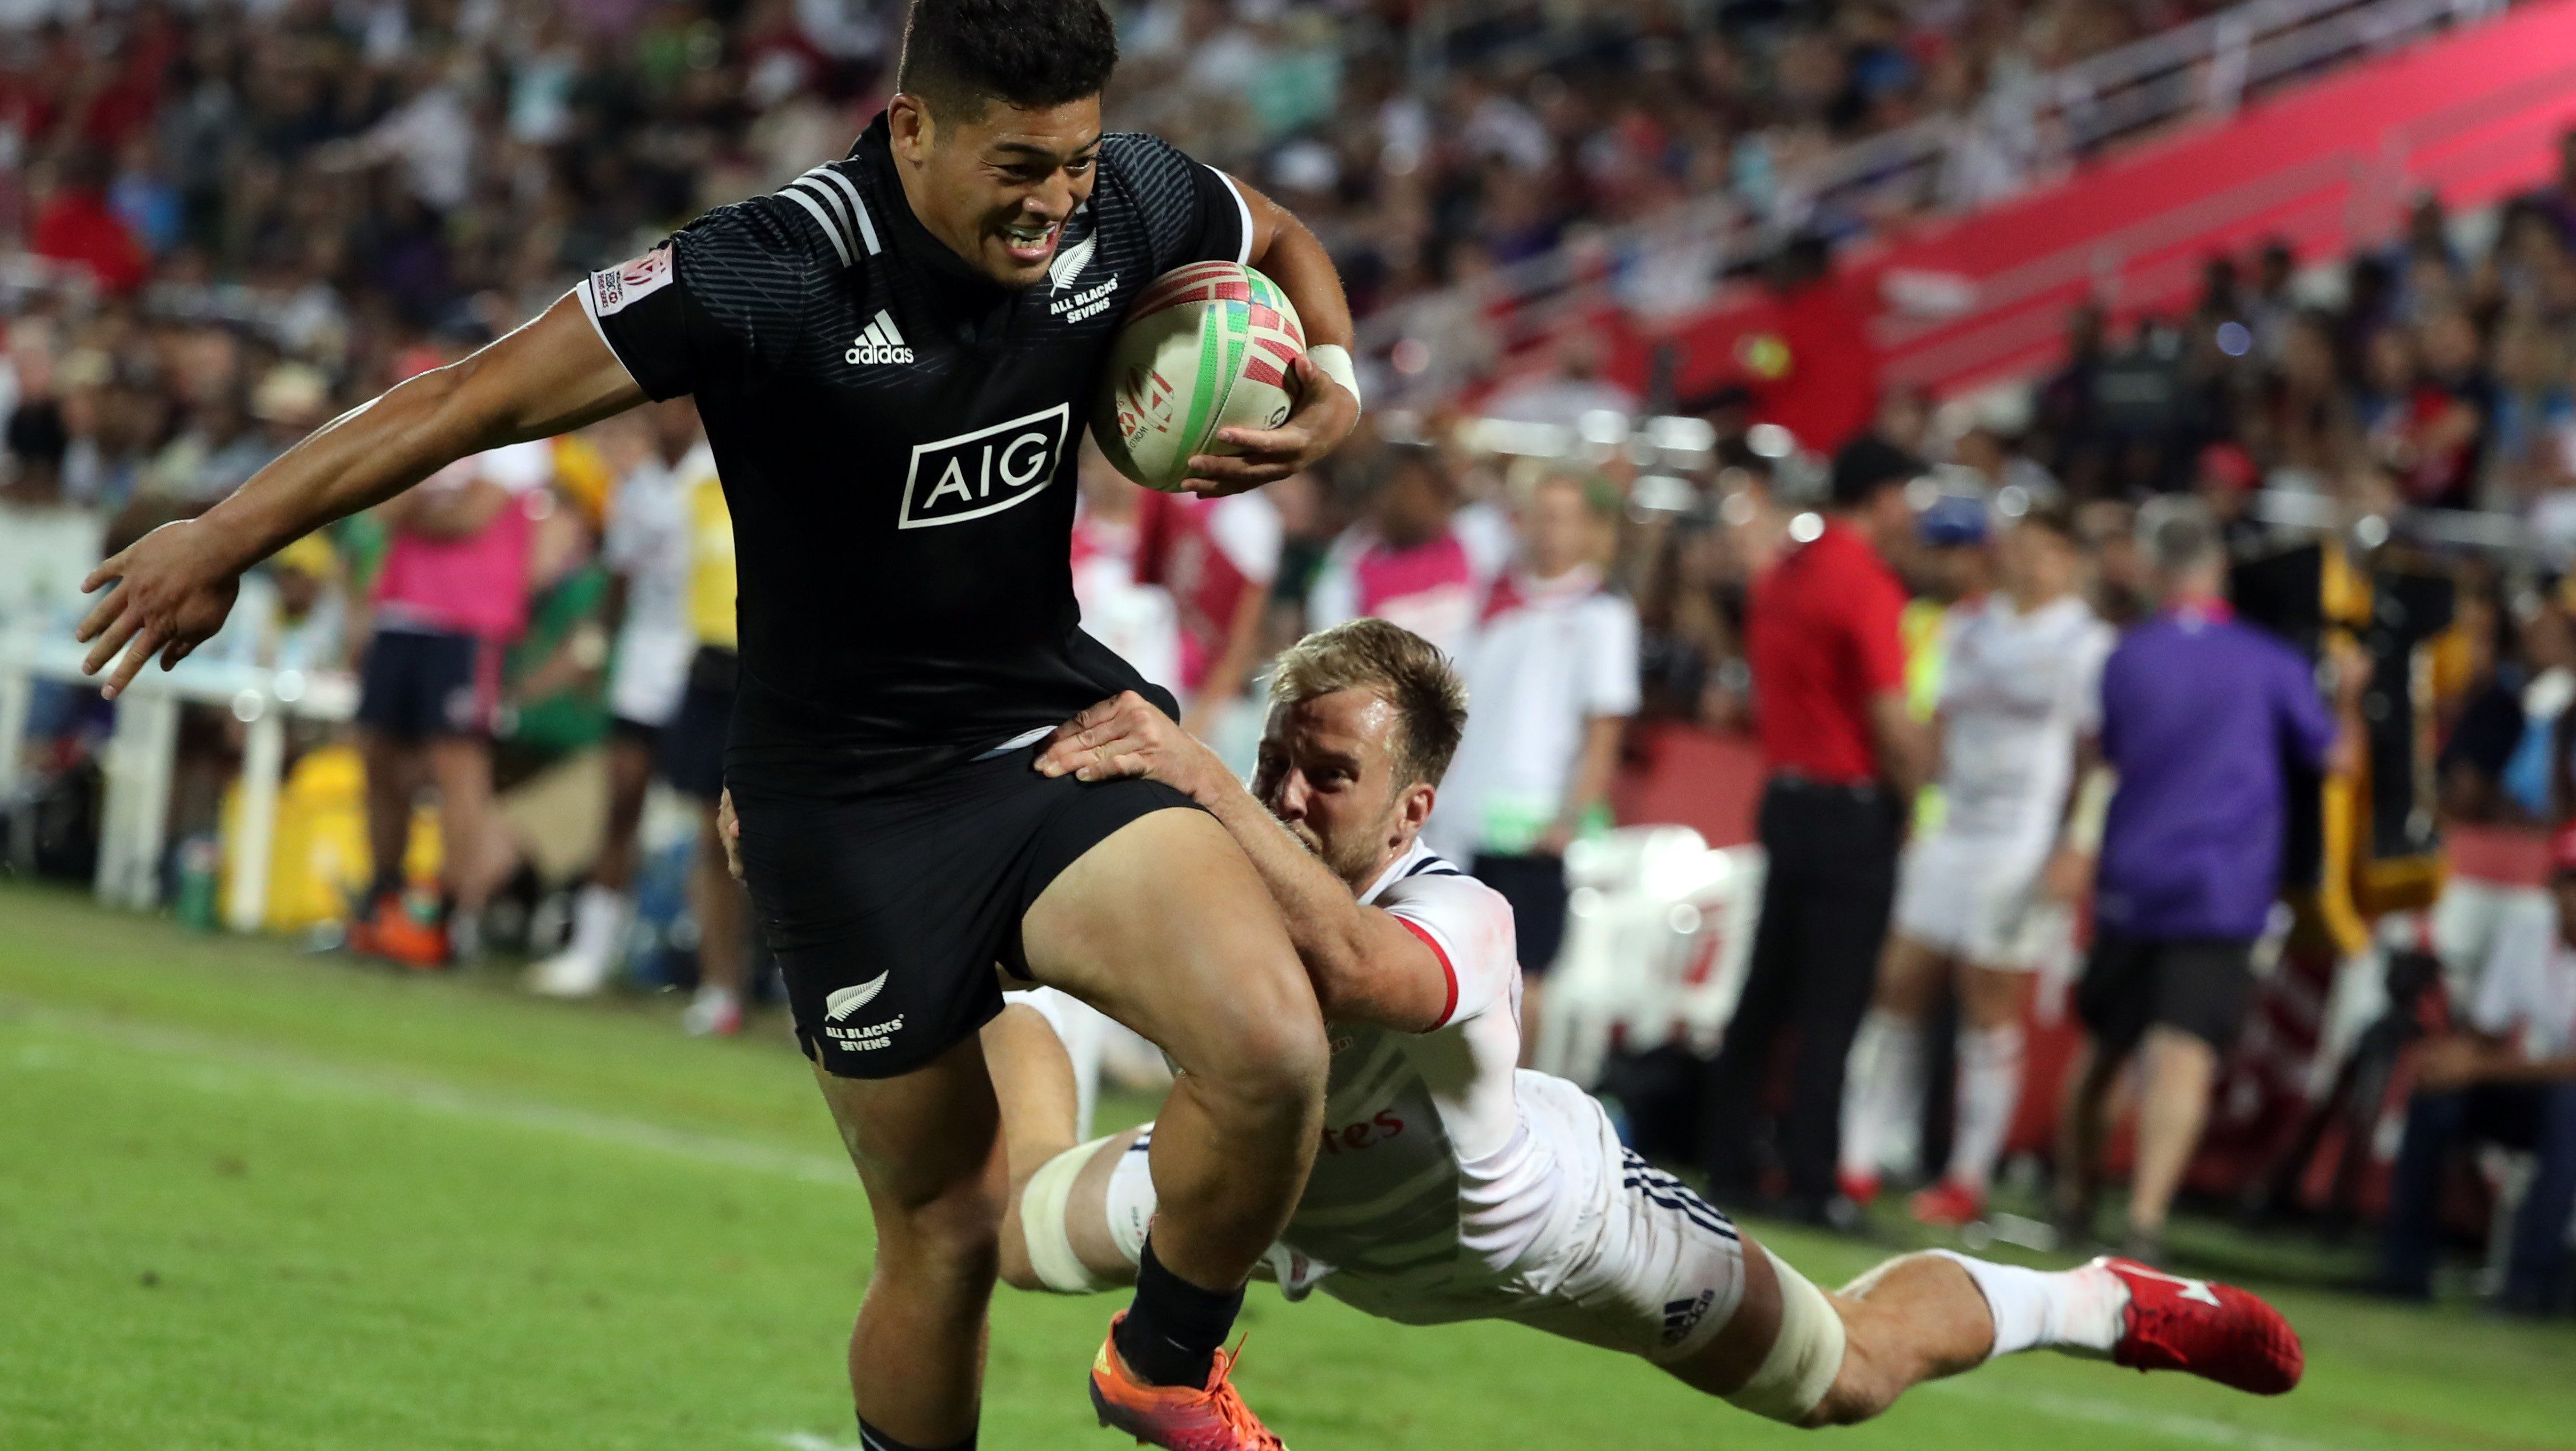 How to Watch Cape Town Rugby Sevens 2018 Online in USA